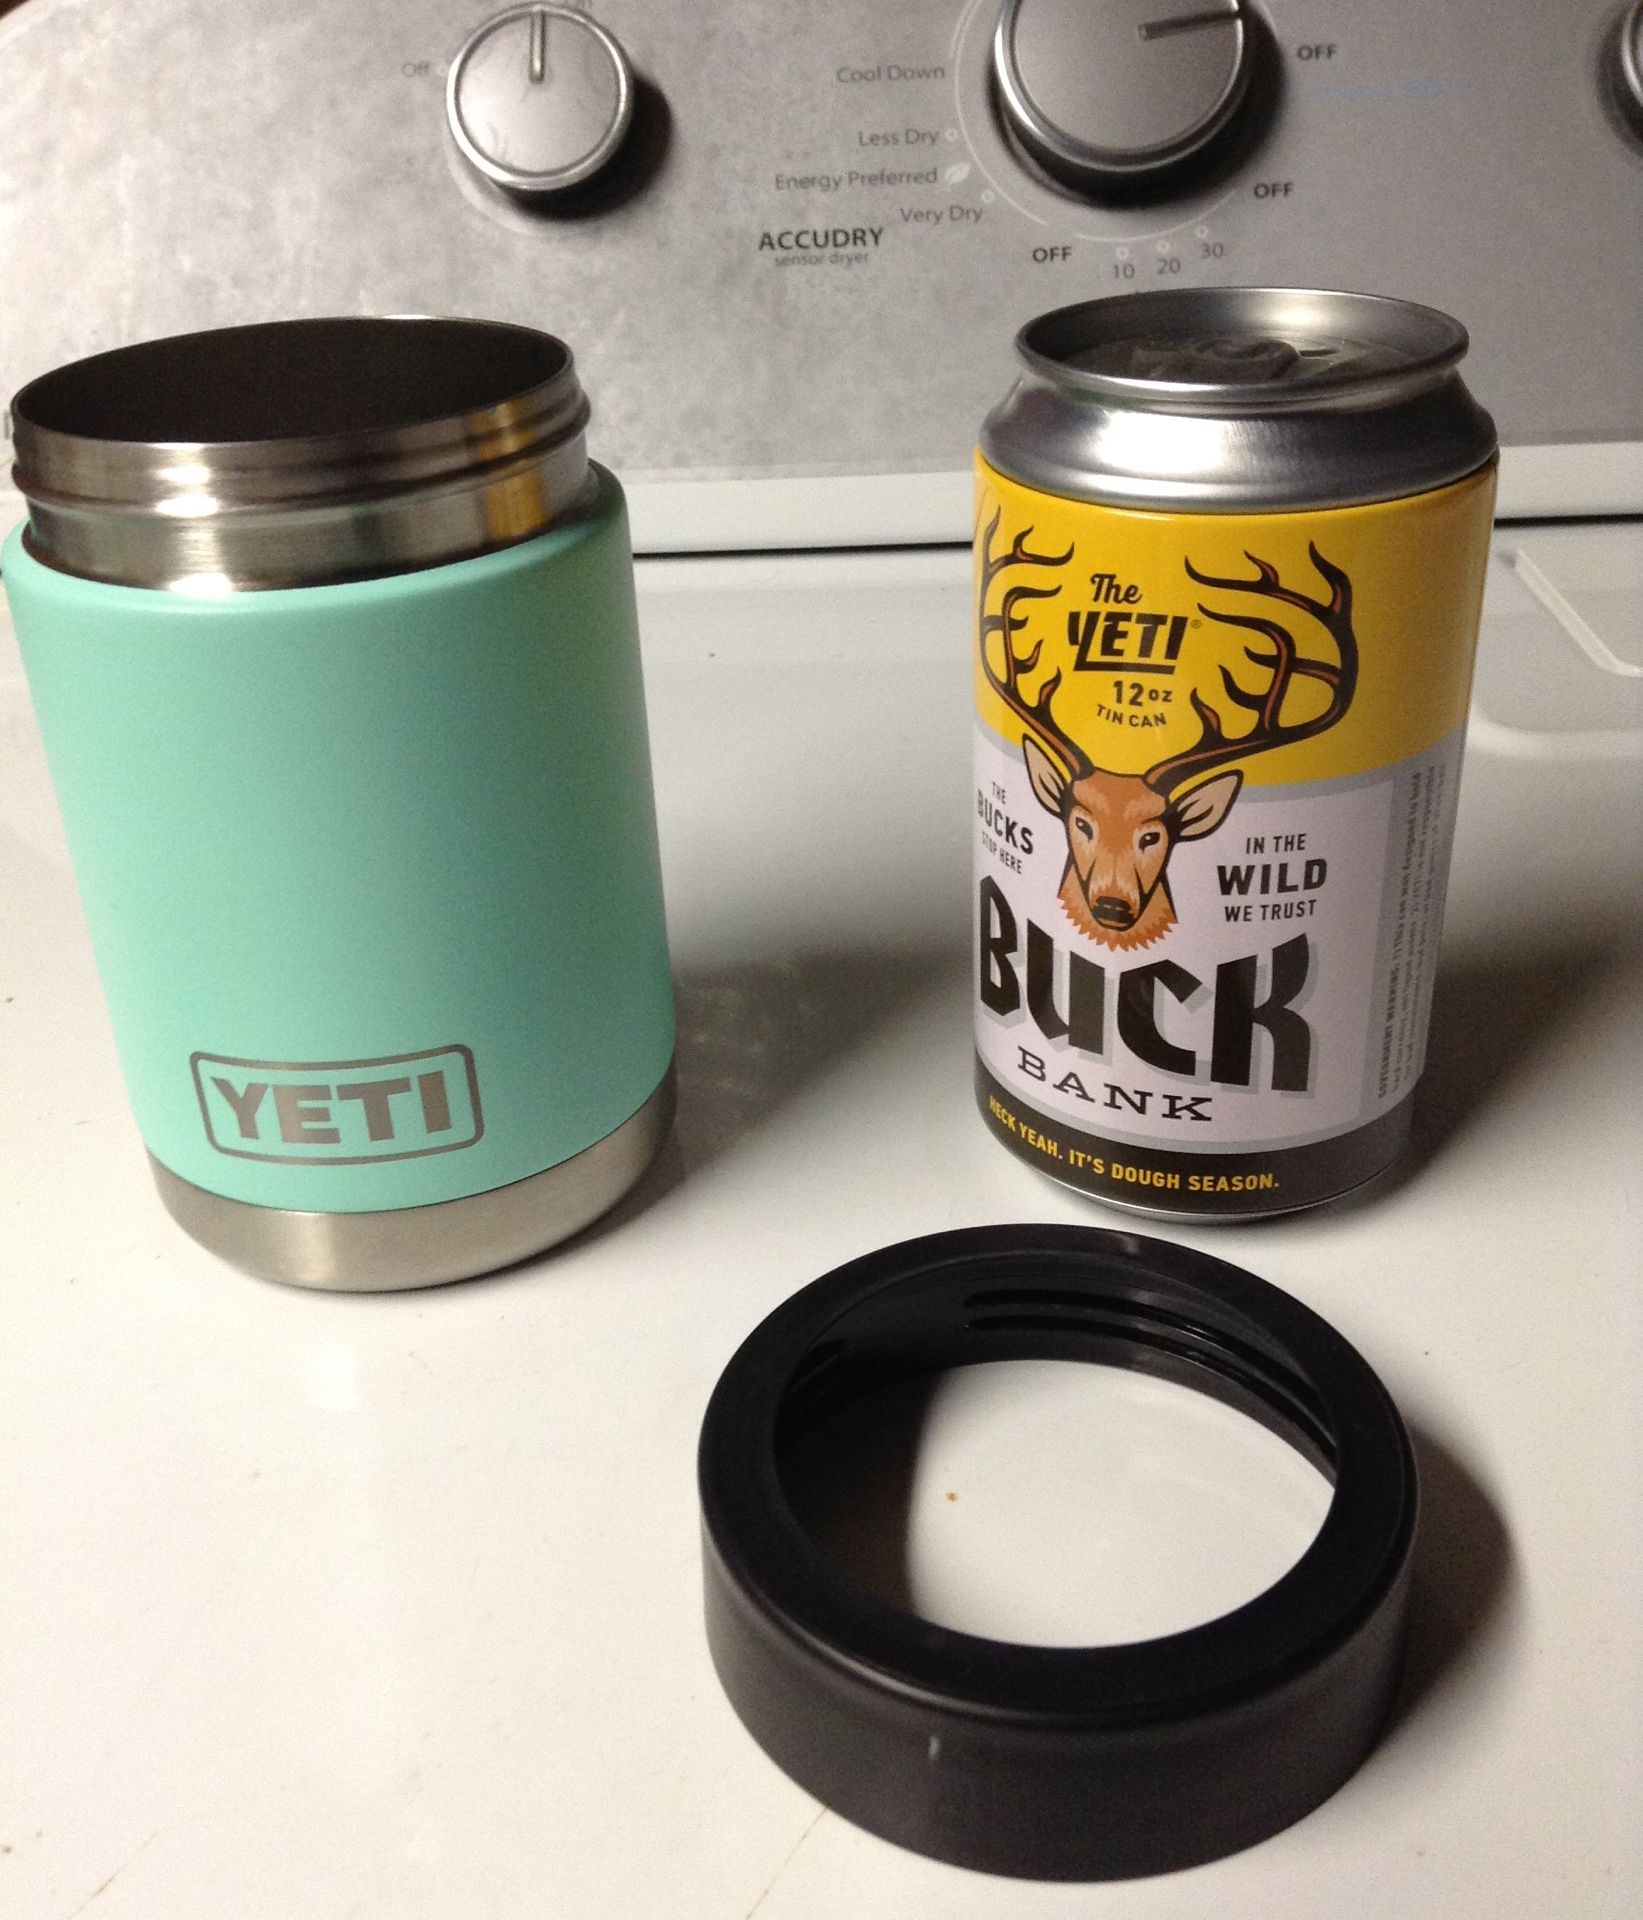 Yeti cuzi with coin bank